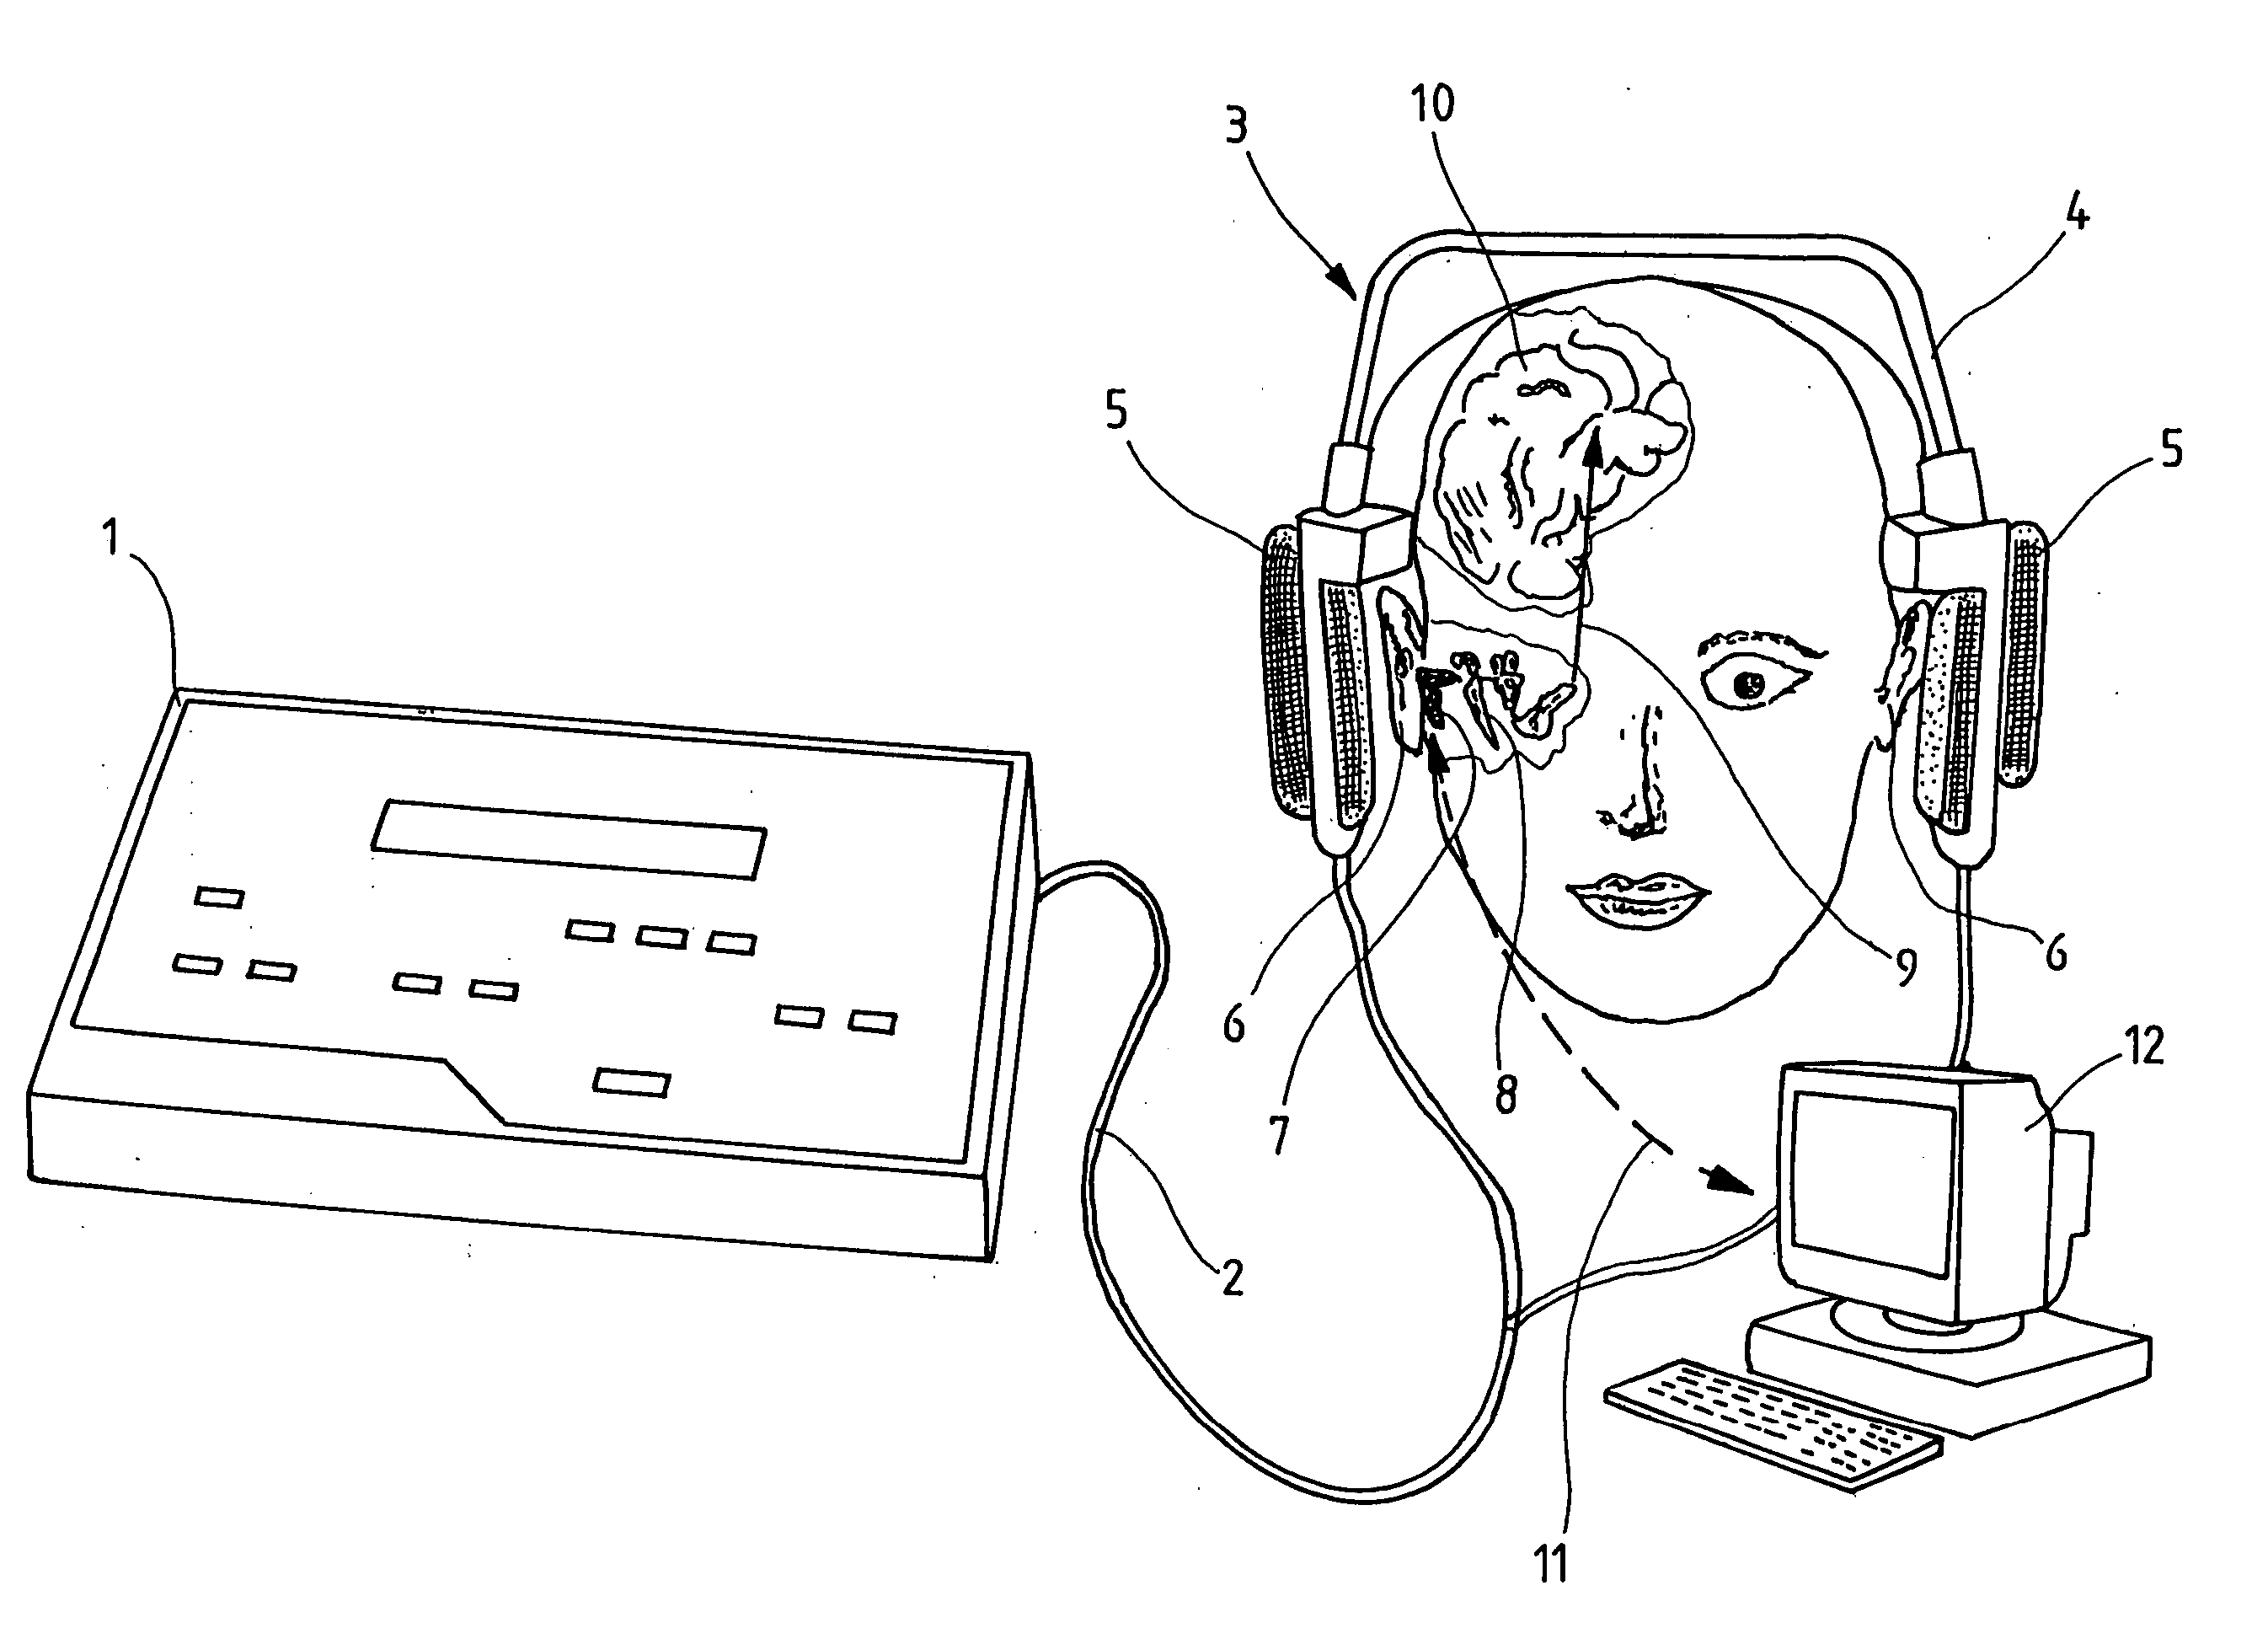 Device and method for configuring a hearing aid